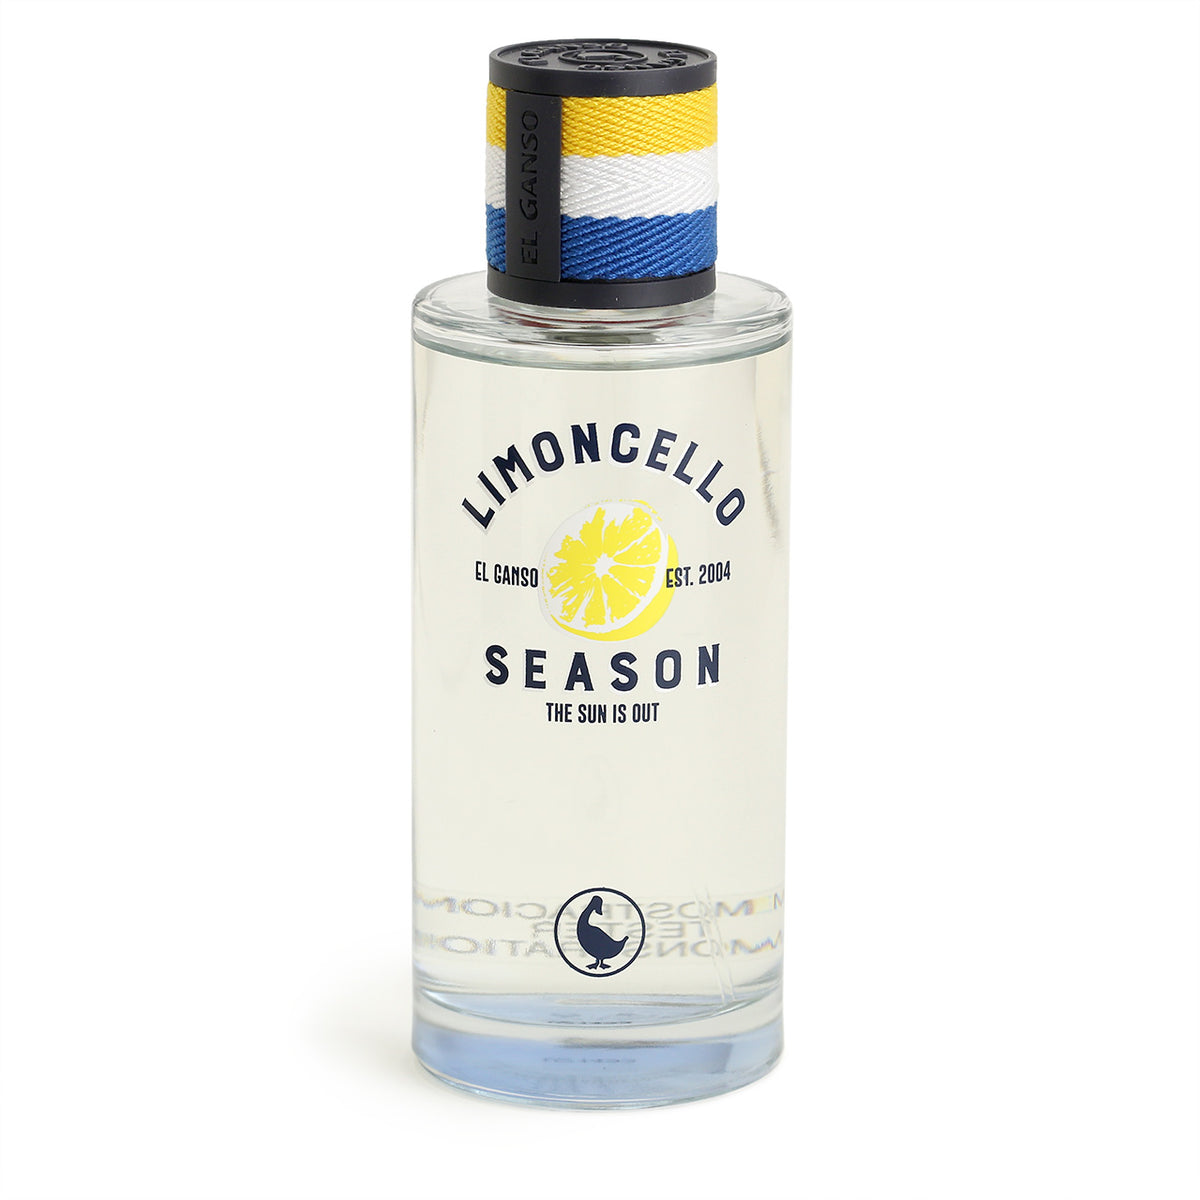 El Ganso Limoncello EDT bottle with LEMON, WHITE AND BLUE-WRAPPED CAP